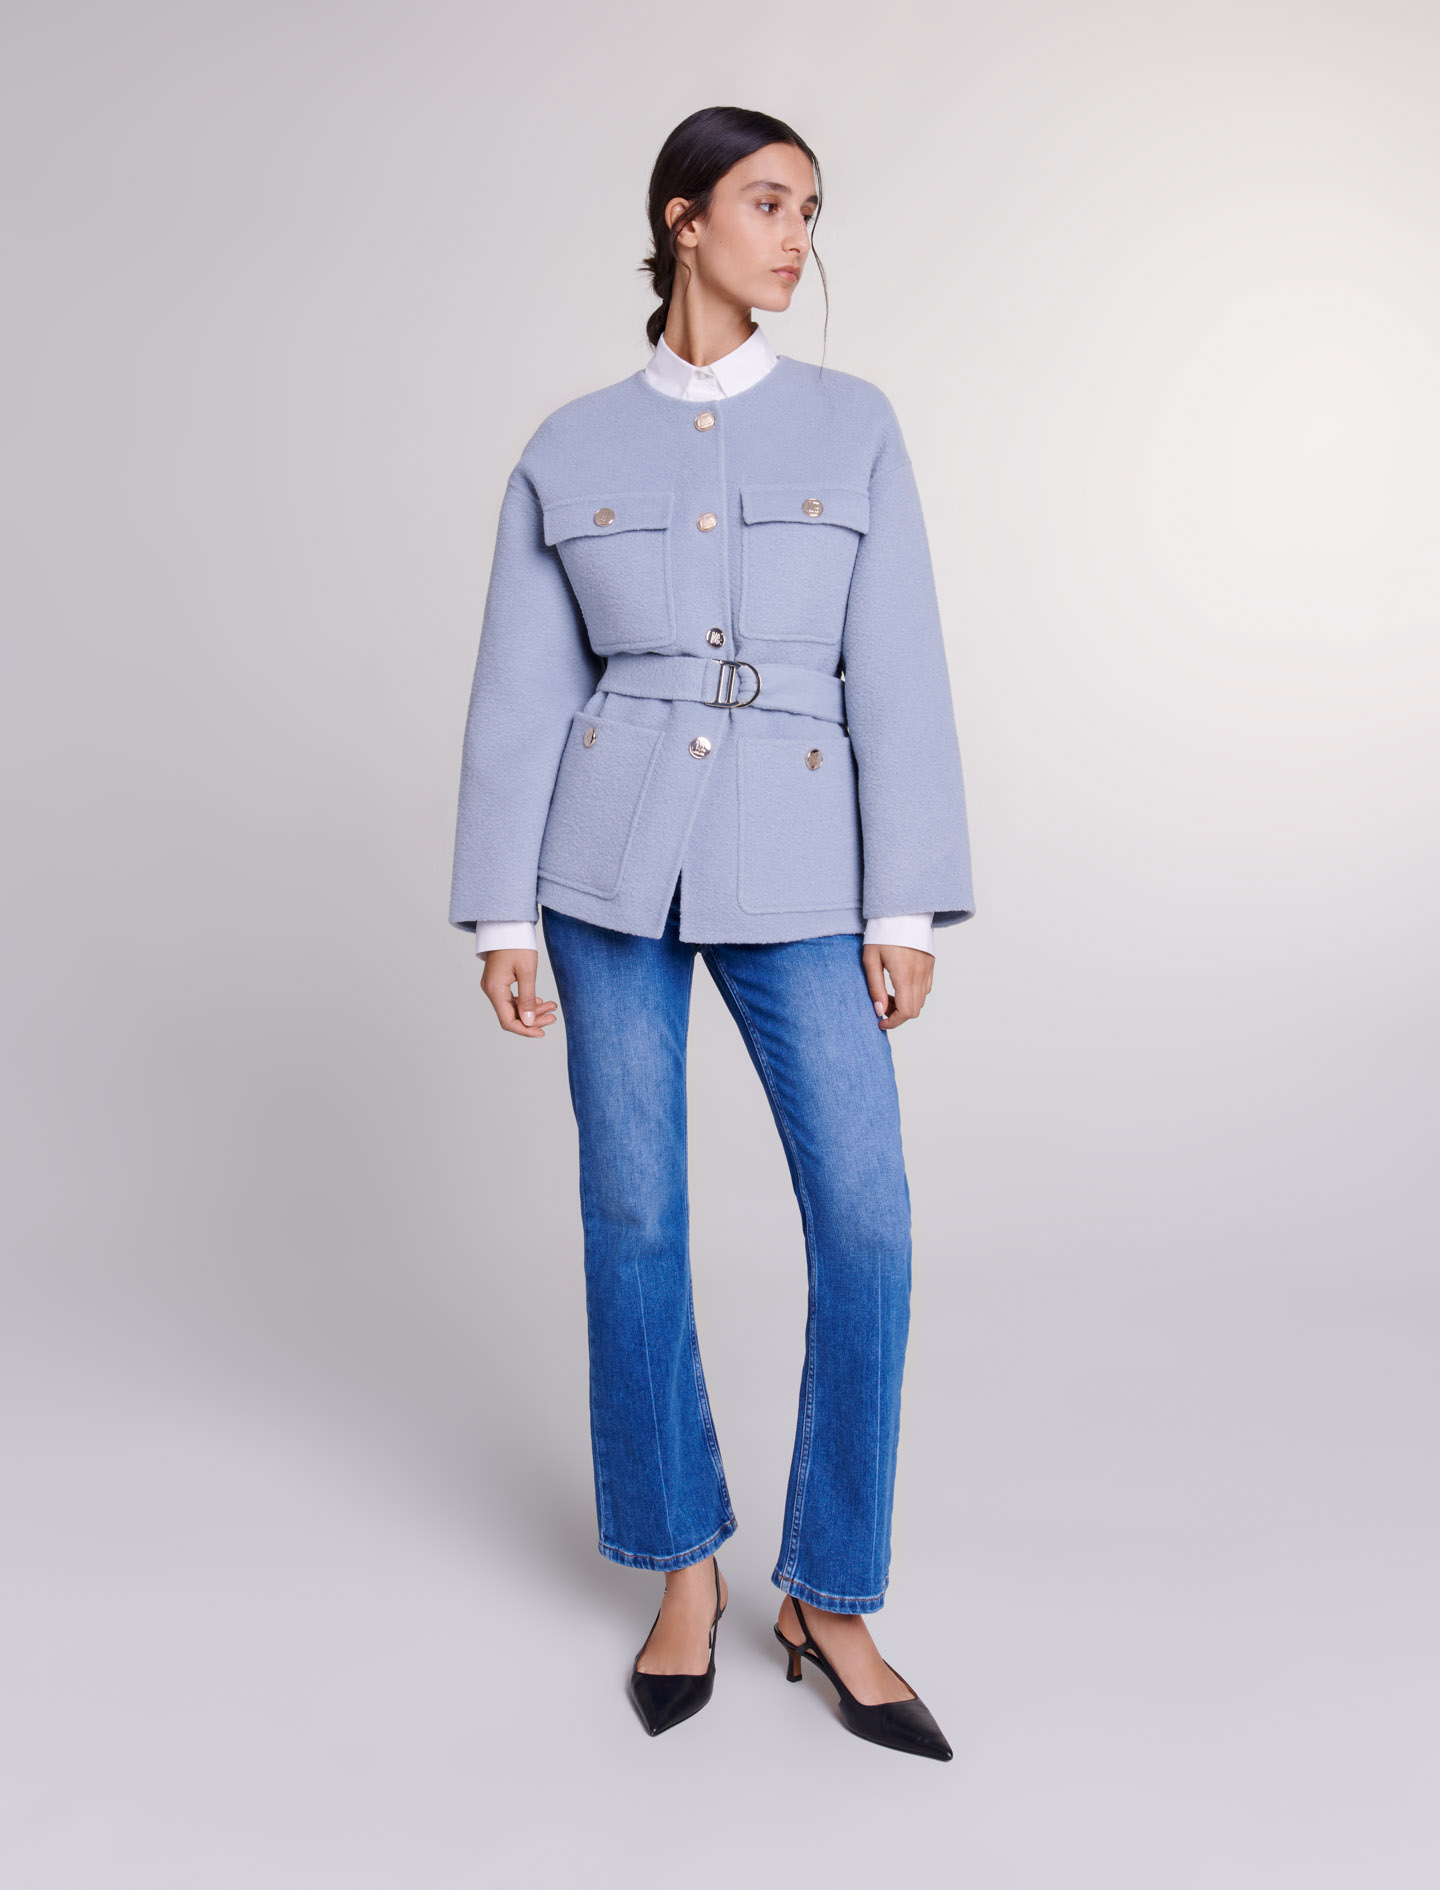 Maje Woman's wool, Belted short coat for Spring/Summer, in color Blue / Blue